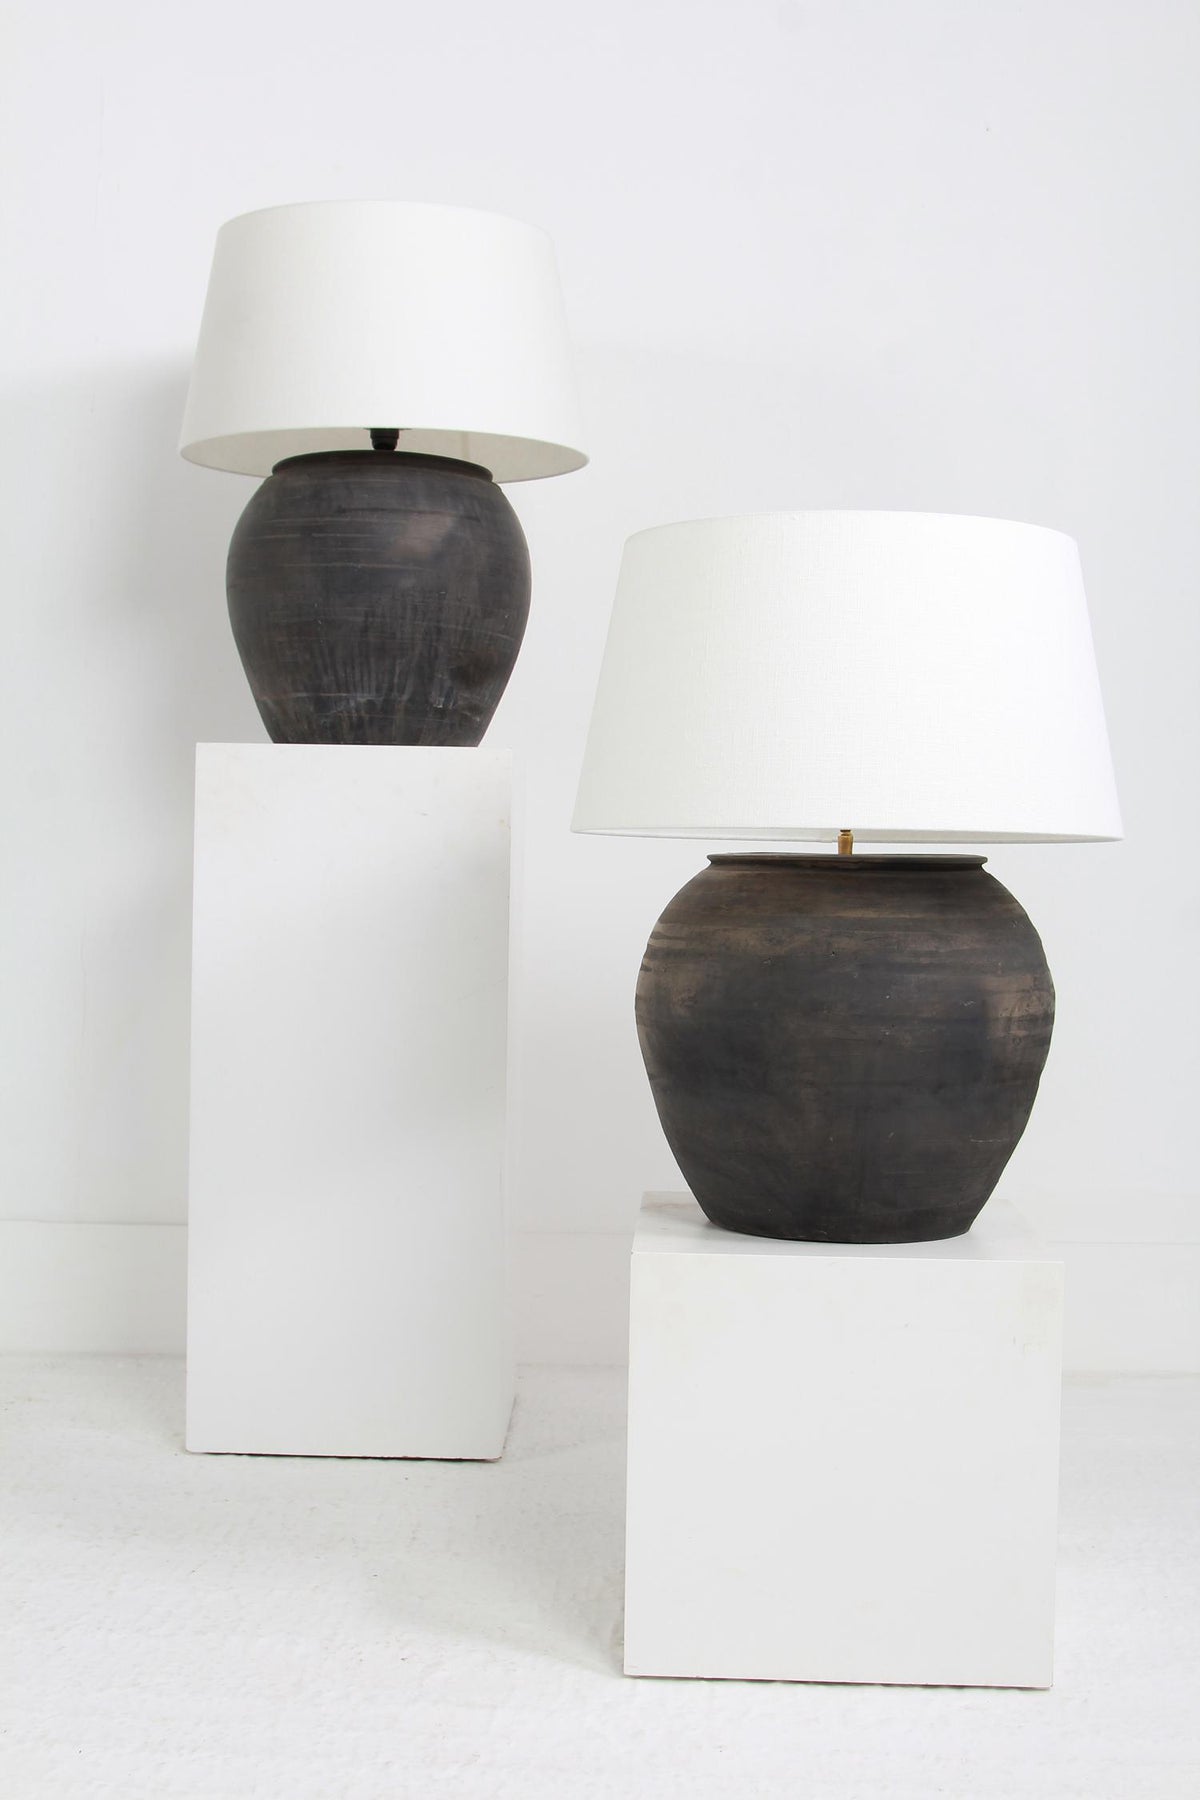 NEAR PAIR OF XL CHINESE BLACK POTTERY LAMPS WITH WHITE LINEN DRUM SHADES